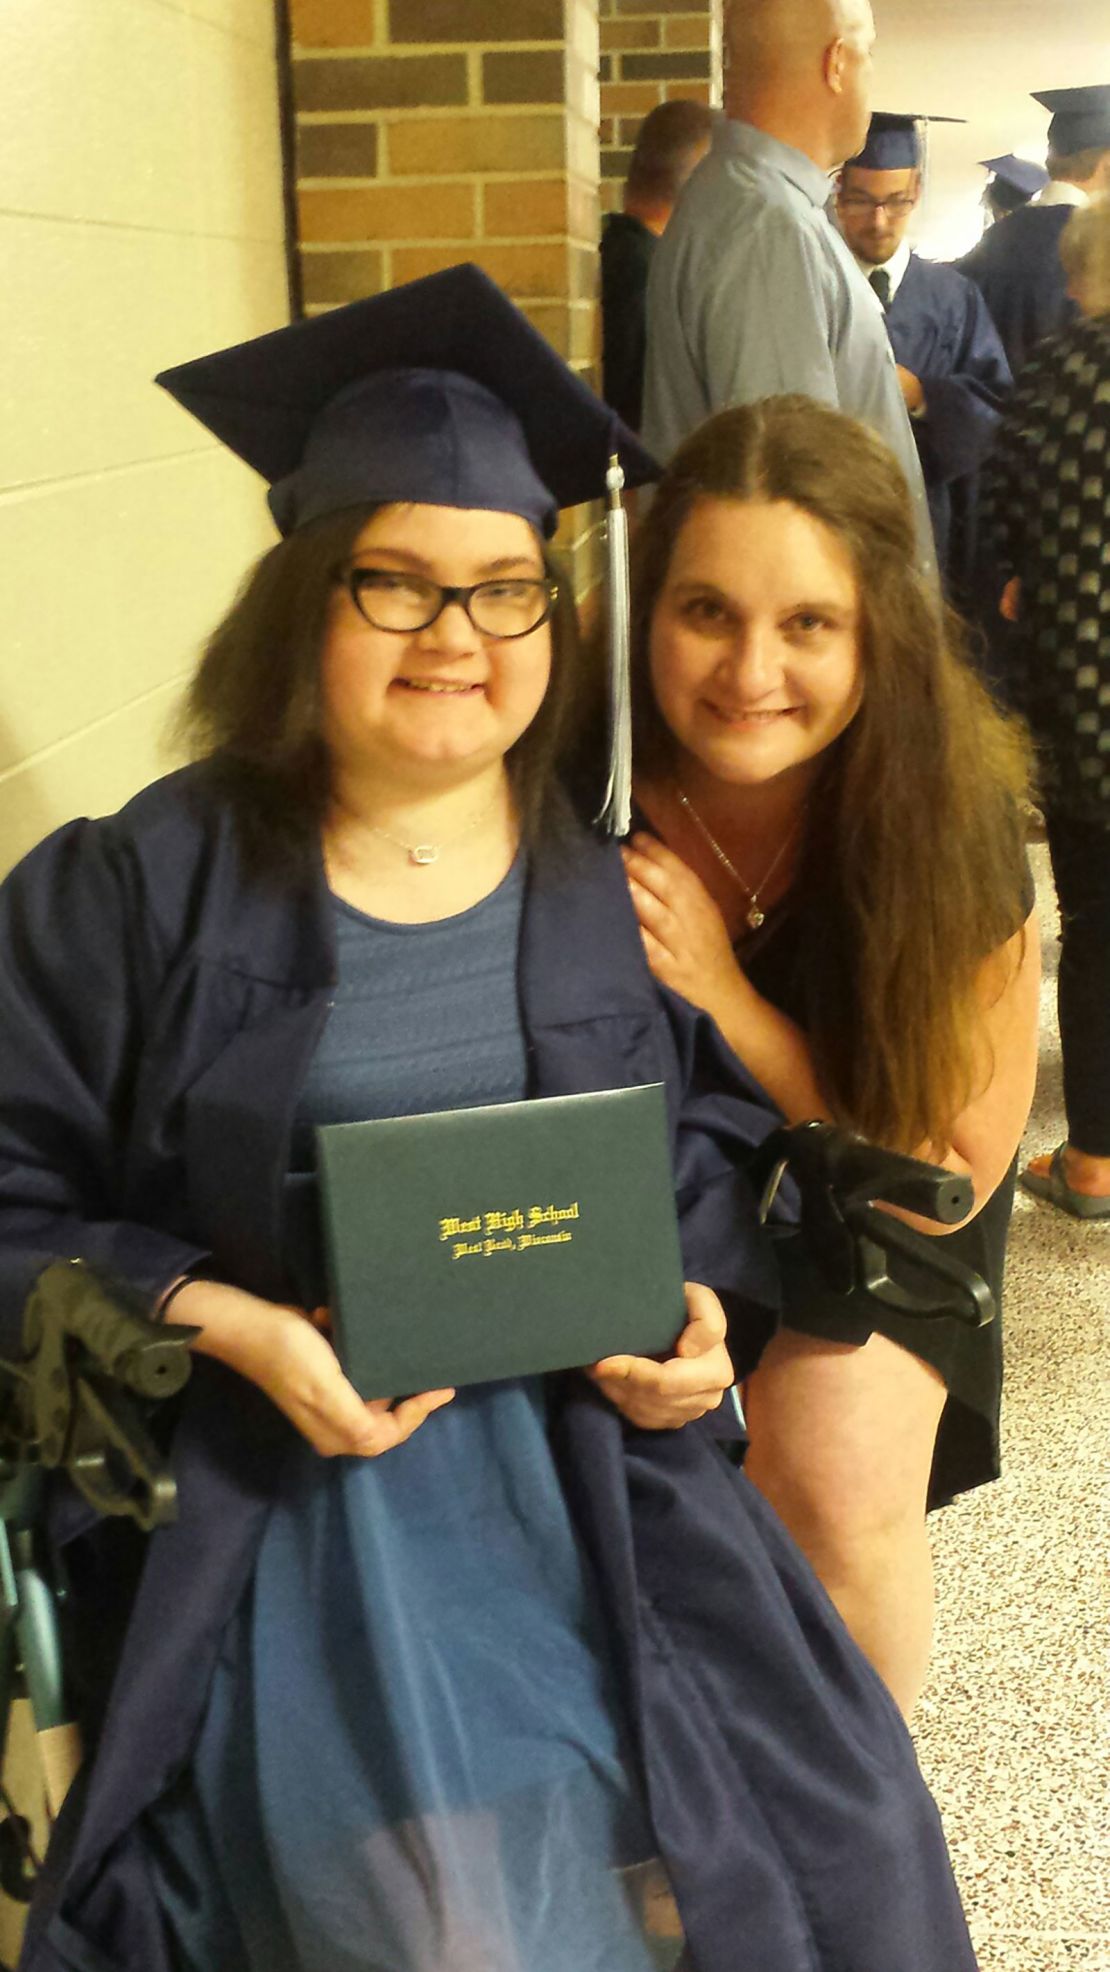 Amber Pflughoeft on the day of her high school graduation with her mother, Tiffany Pflughoeft.